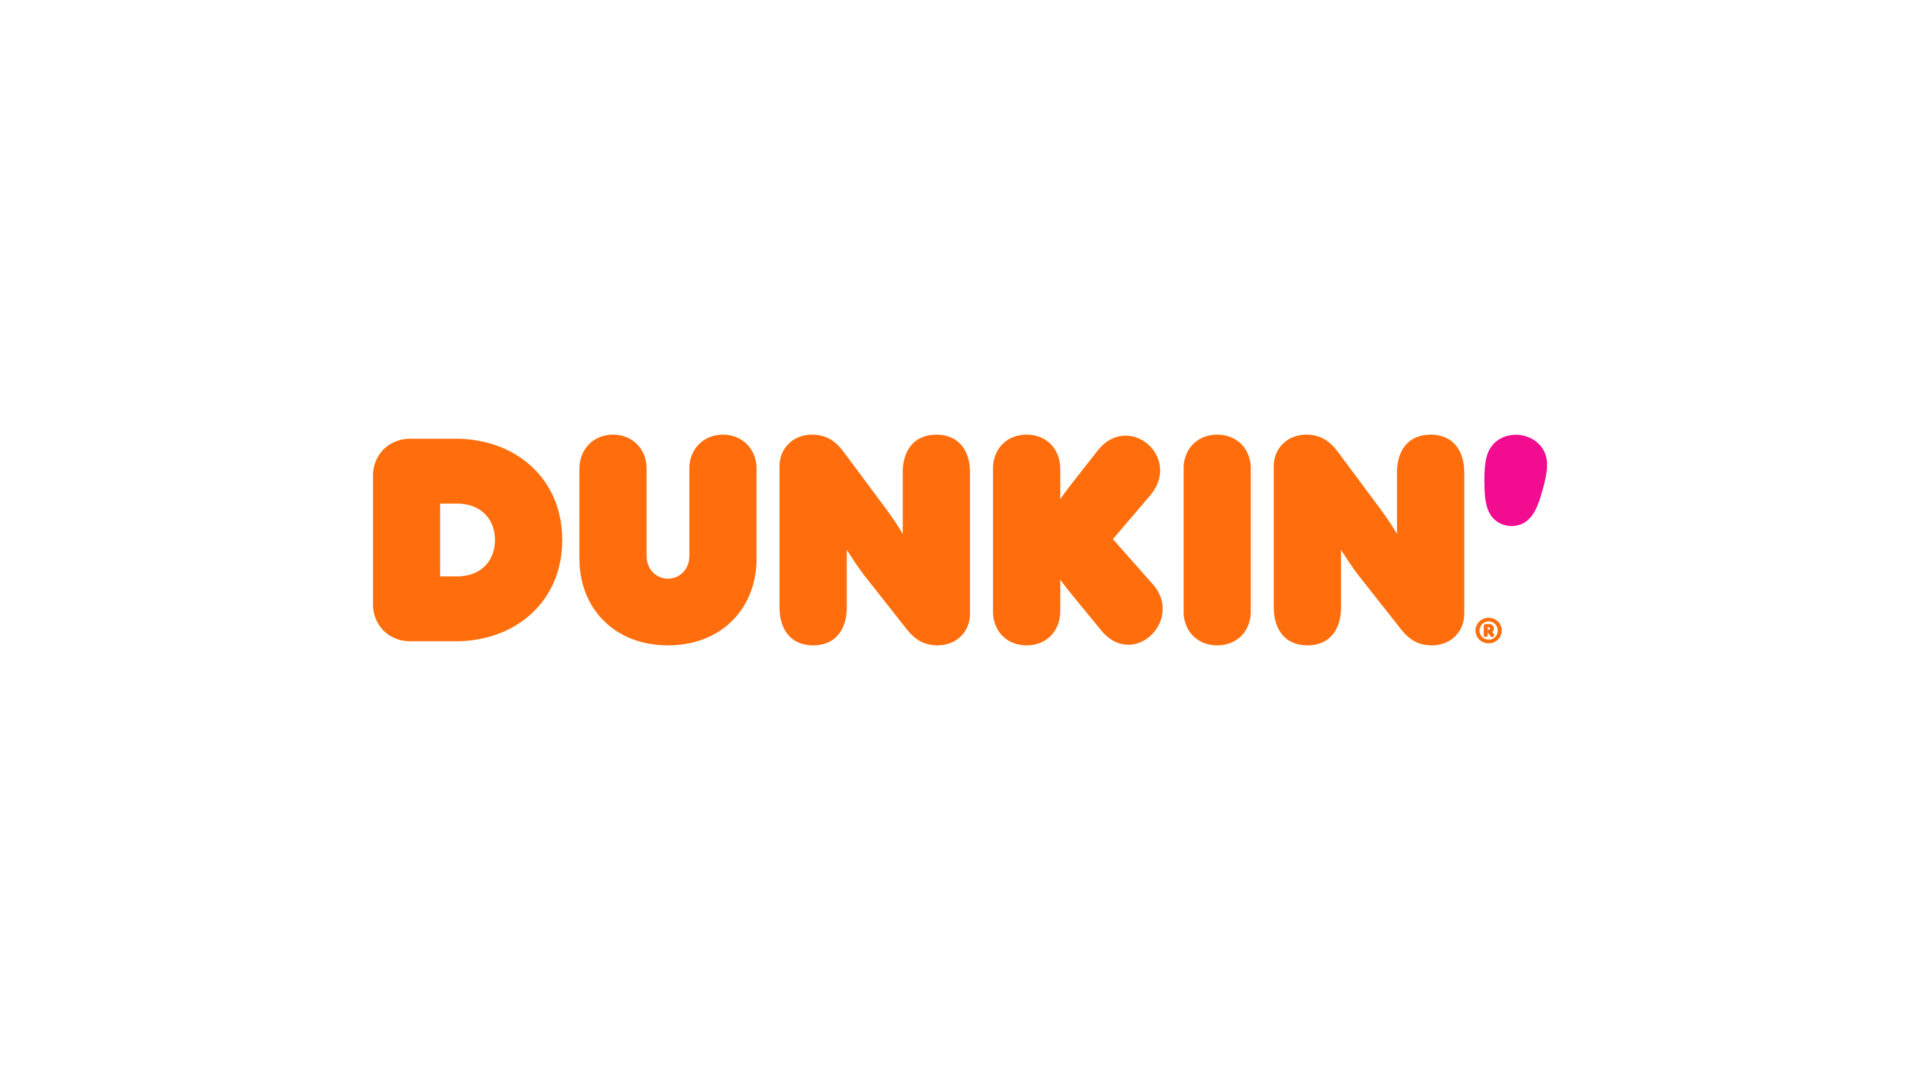 A dunkin donuts logo is shown.